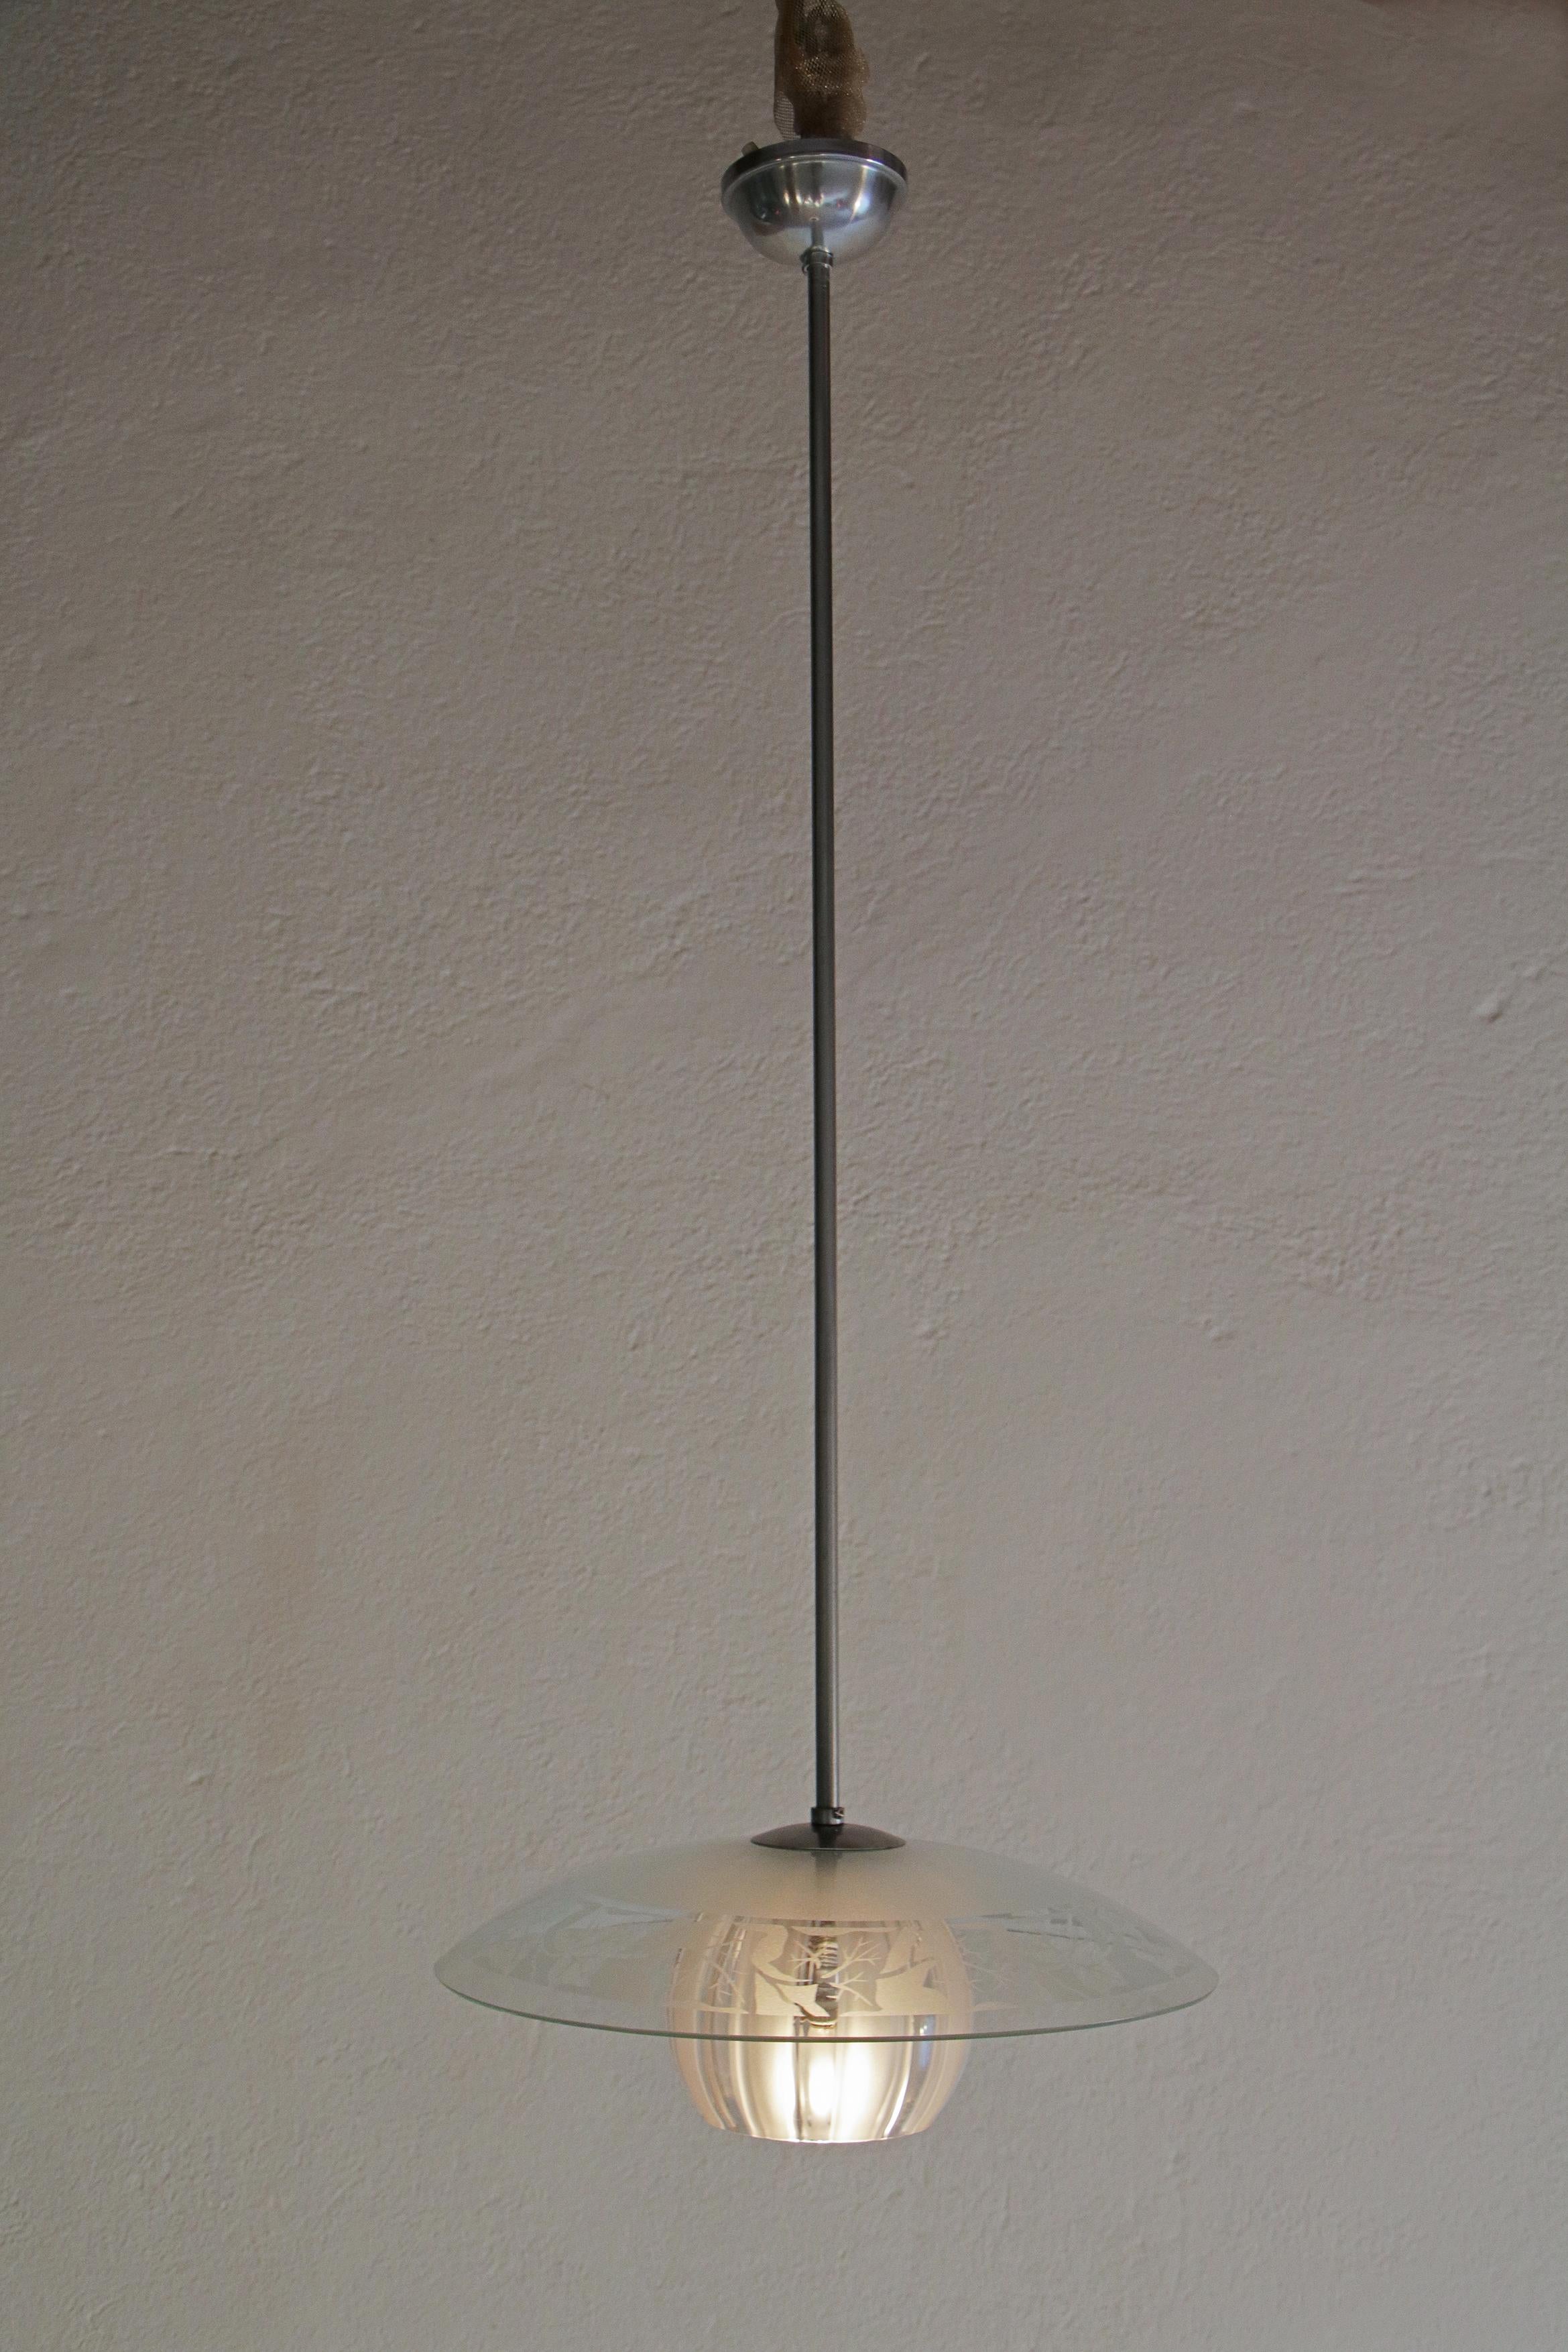 Polished Italian Mid-Century Blown Glass Pendant Lamp Attributed to Stilnovo, 1950s For Sale